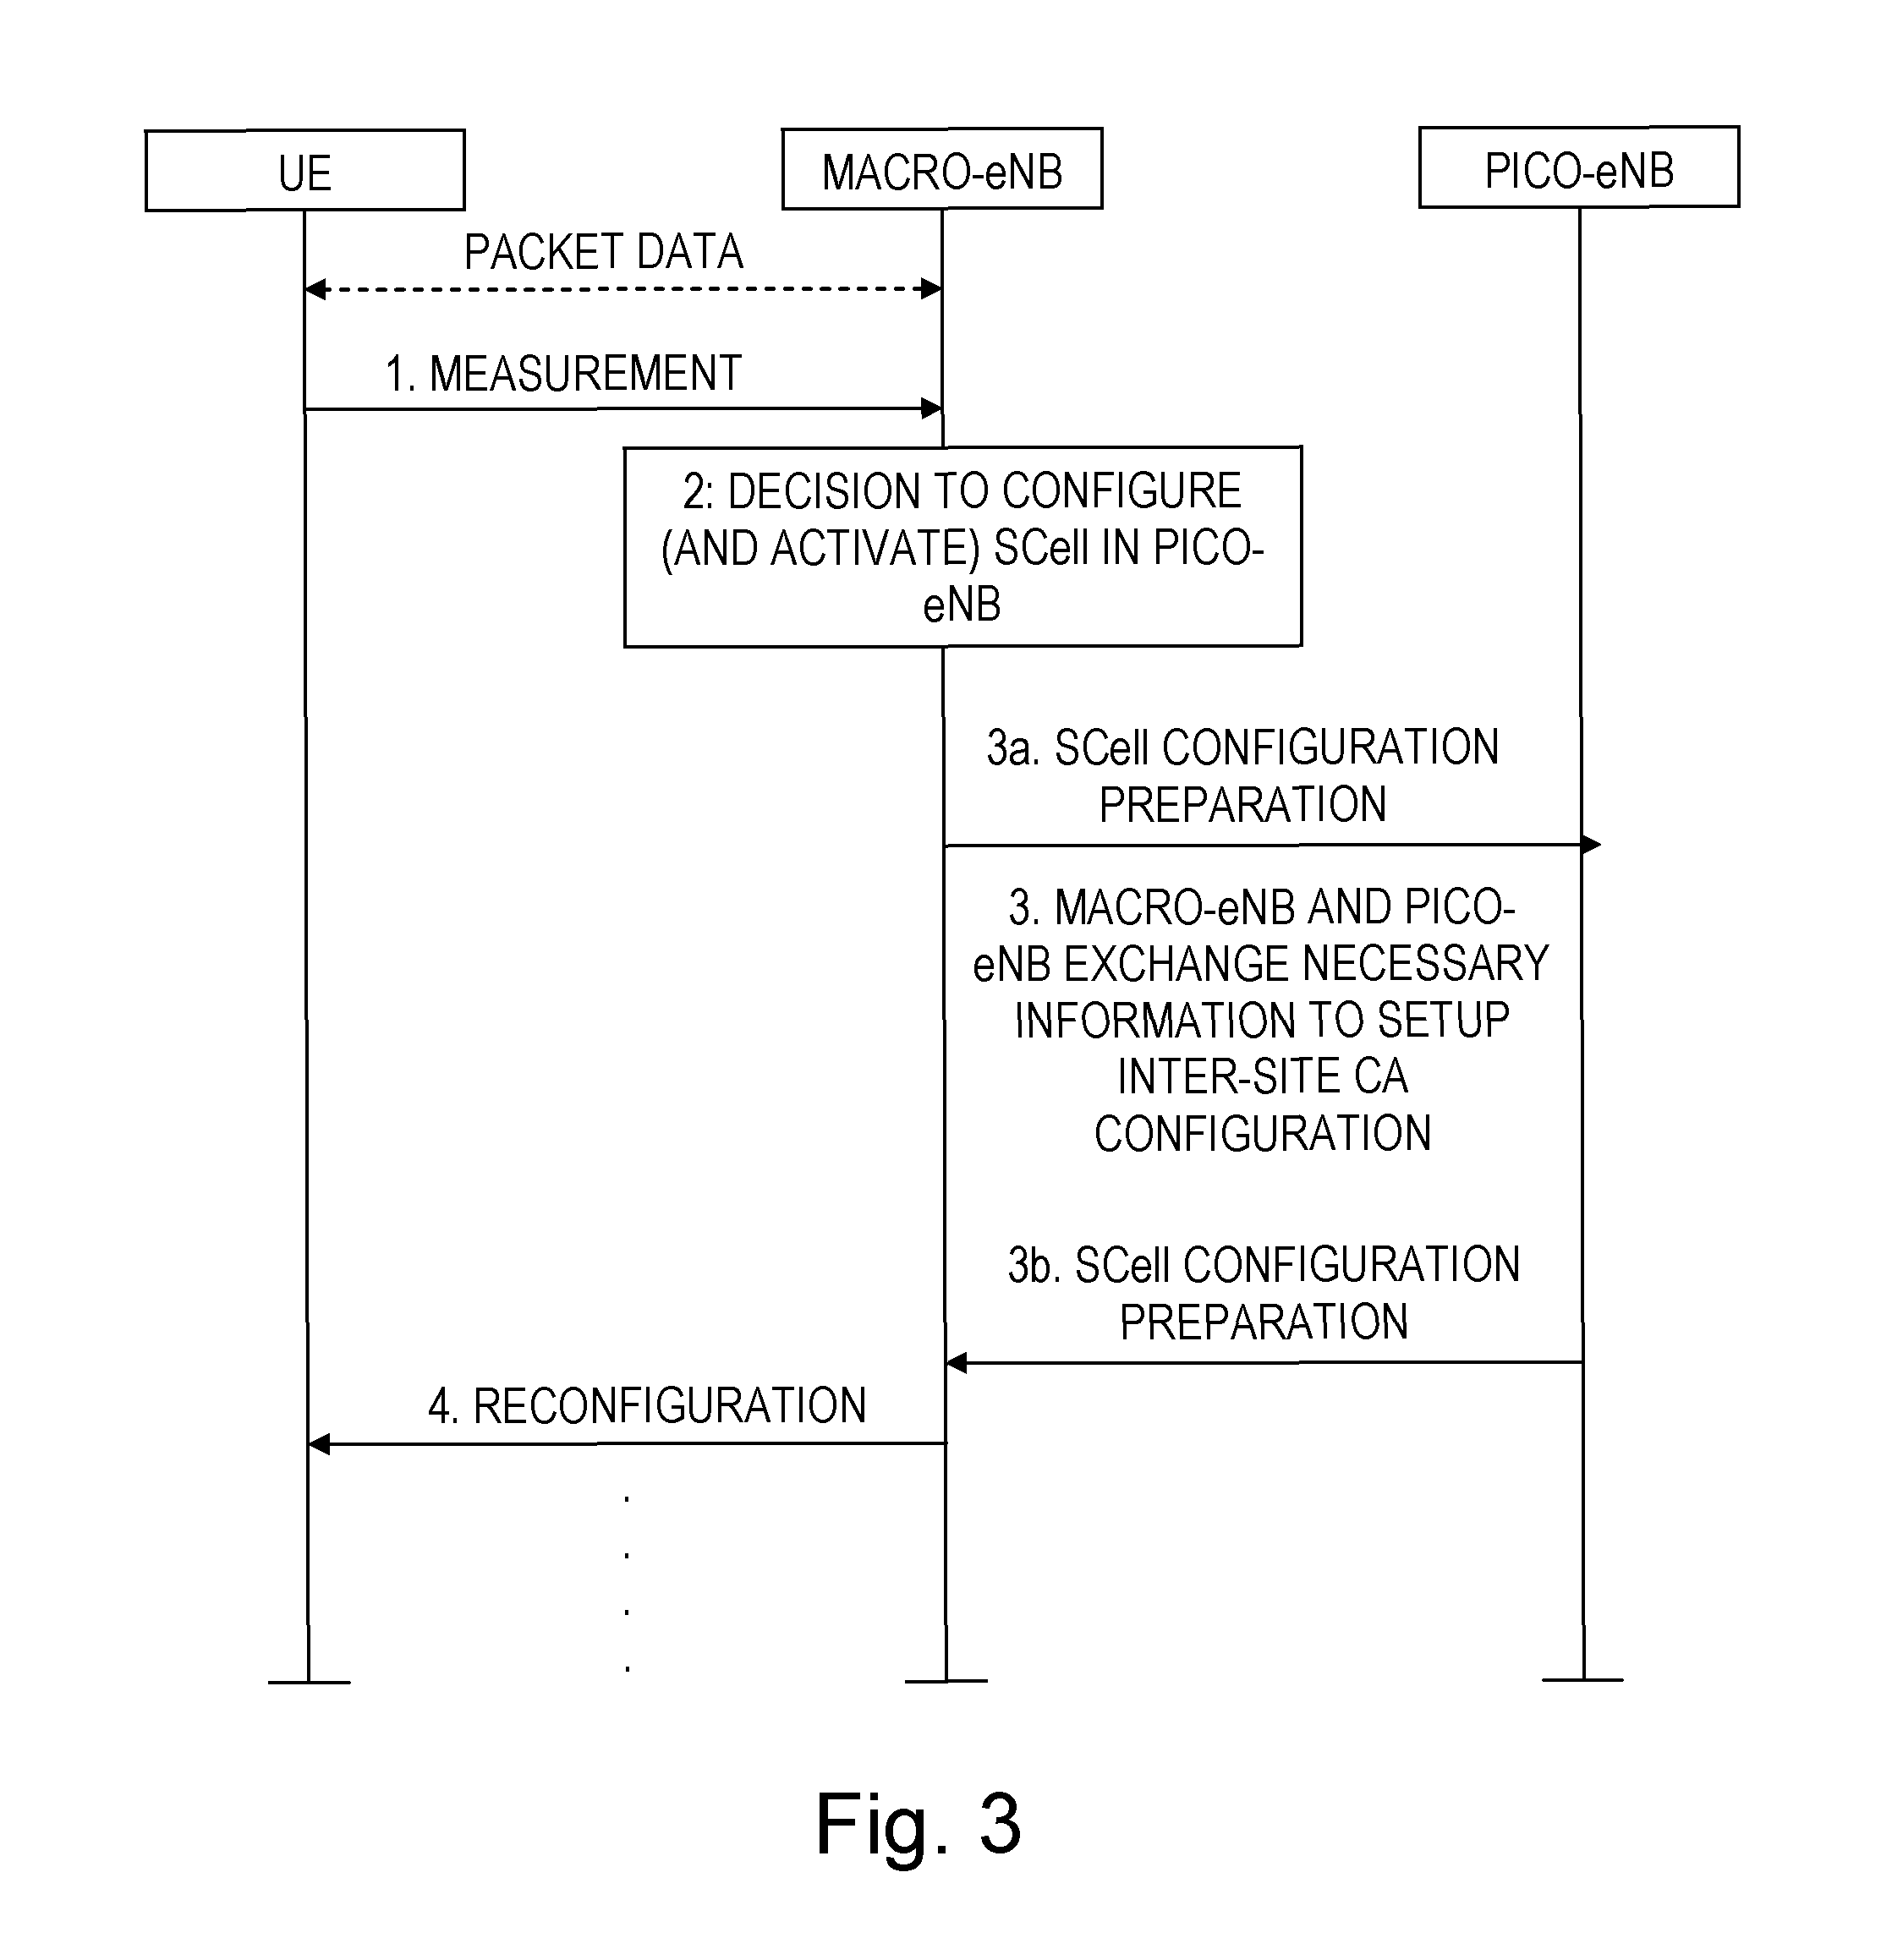 Secondary Cell Preparation for Inter-Site Carrier Aggregation